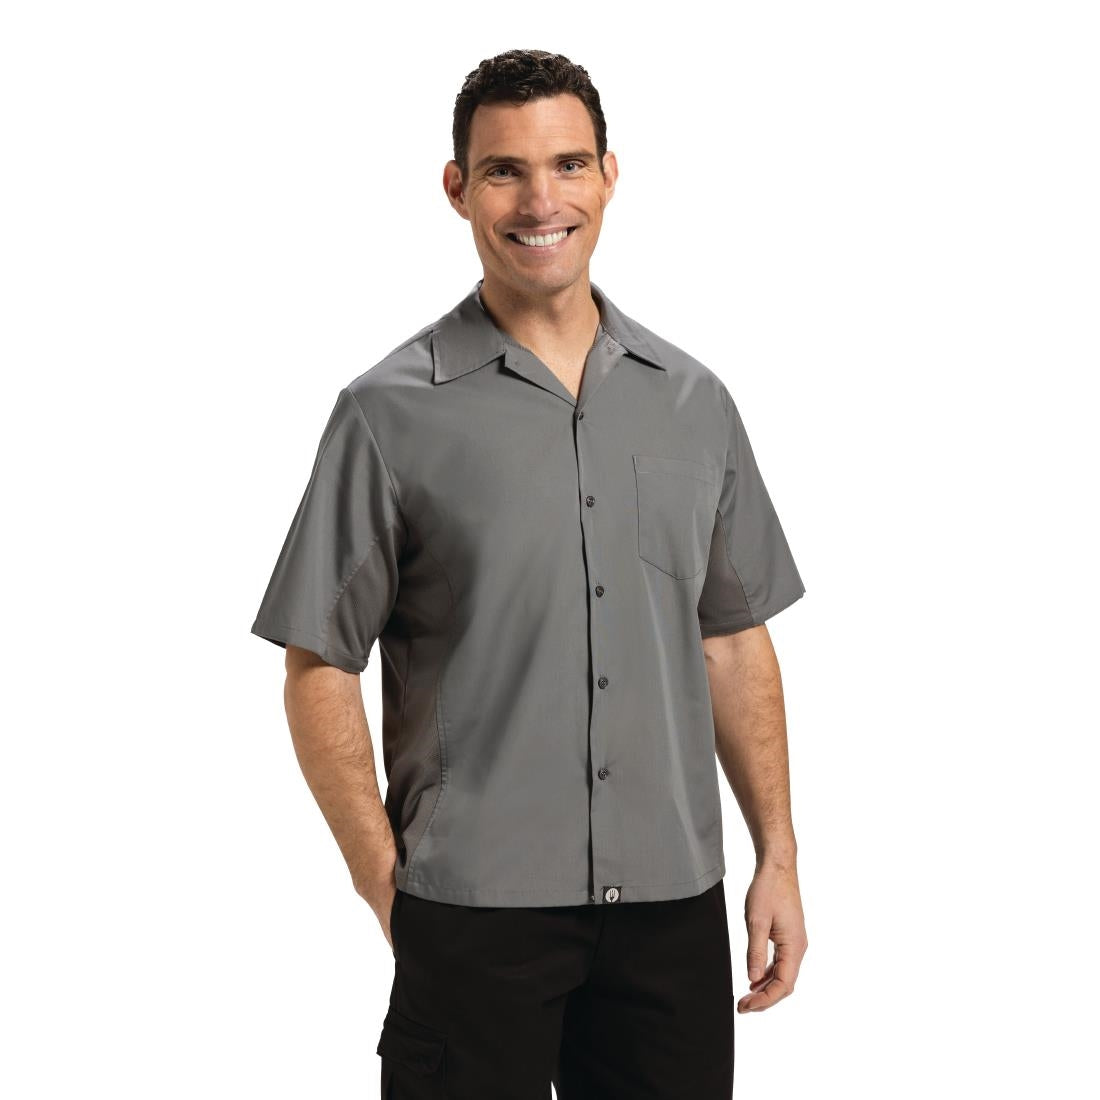 B179-S Chef Works Unisex Cool Vent Chefs Shirt Grey S JD Catering Equipment Solutions Ltd